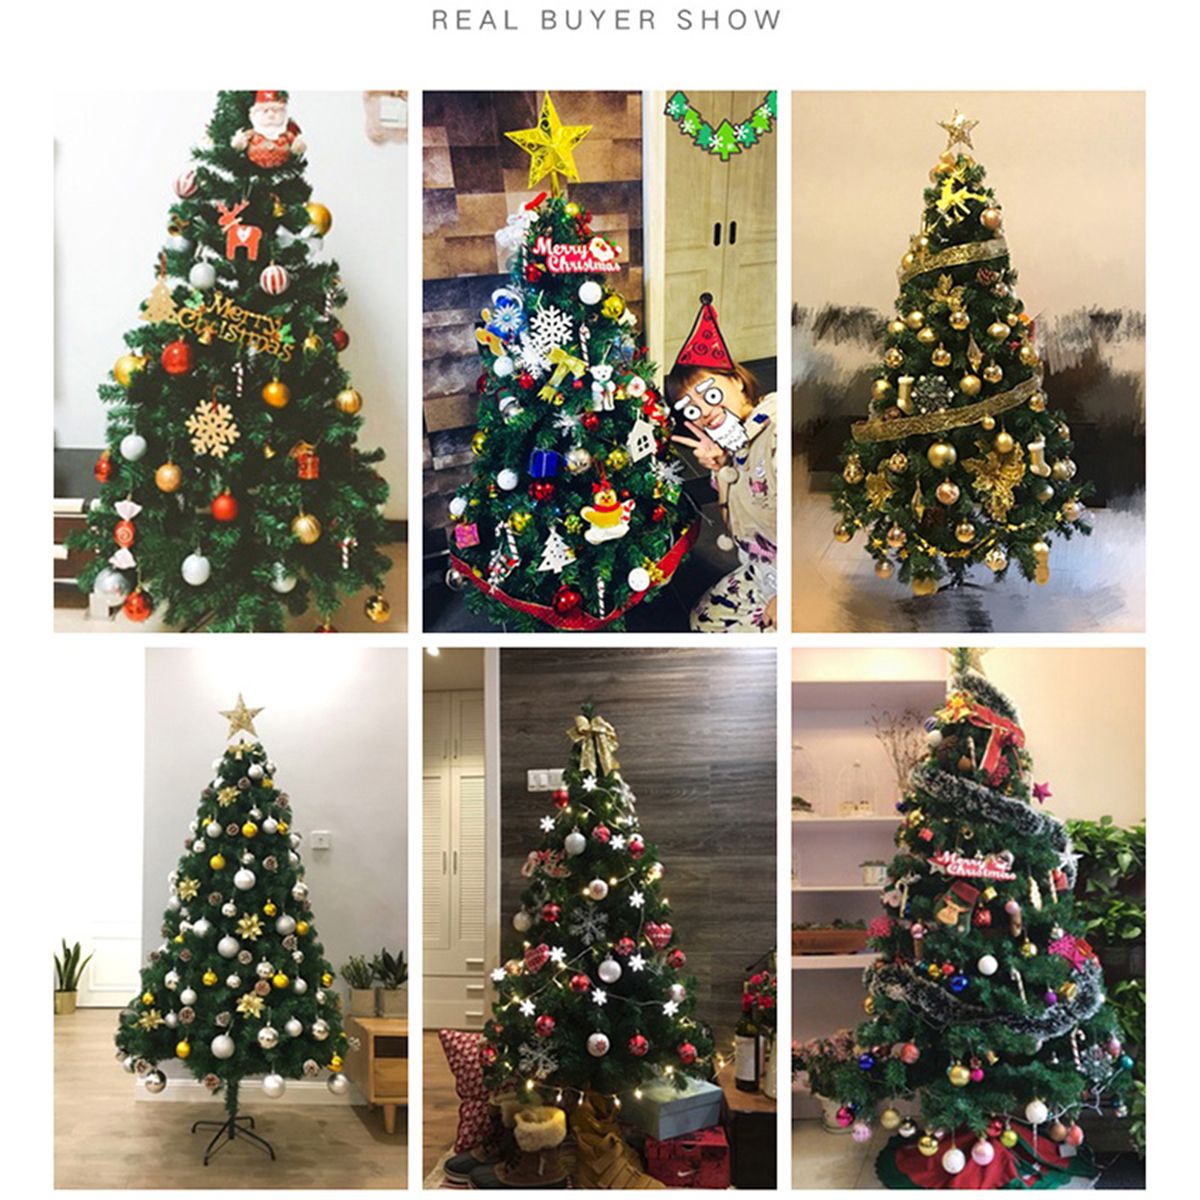 121518m-Artificial-Christmas-Tree-PVC-Pine-Needle-Encrypted-Mini-Tree-With-Solid-Stand-Holiday-Festi-1782561